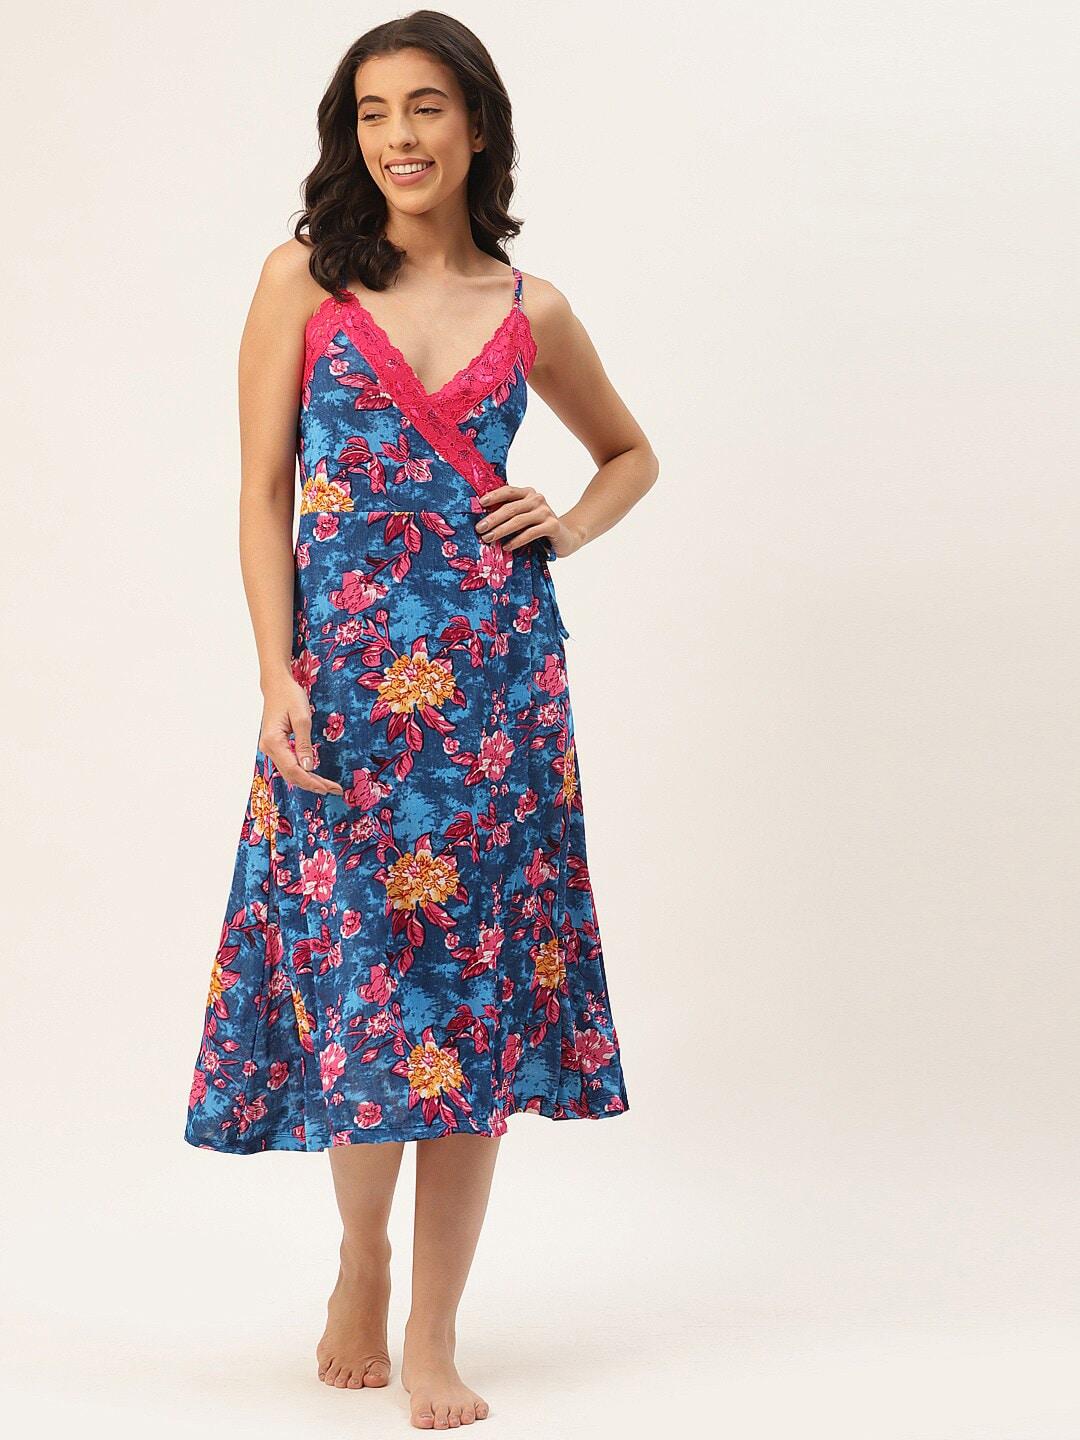 ms.lingies v neck floral printed nightdress